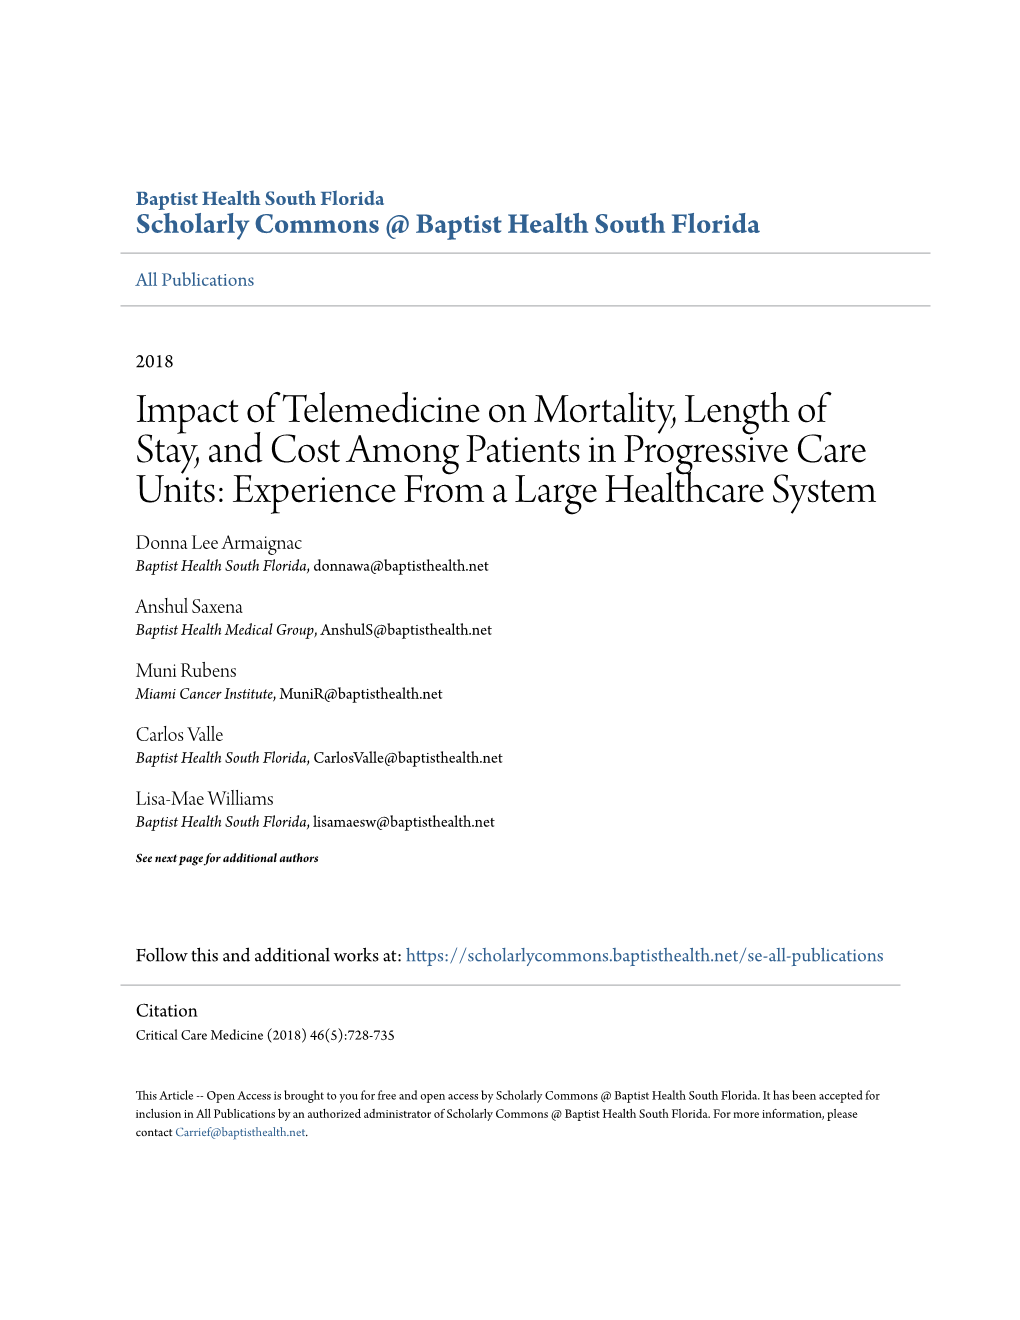 Impact of Telemedicine on Mortality, Length of Stay, and Cost Among